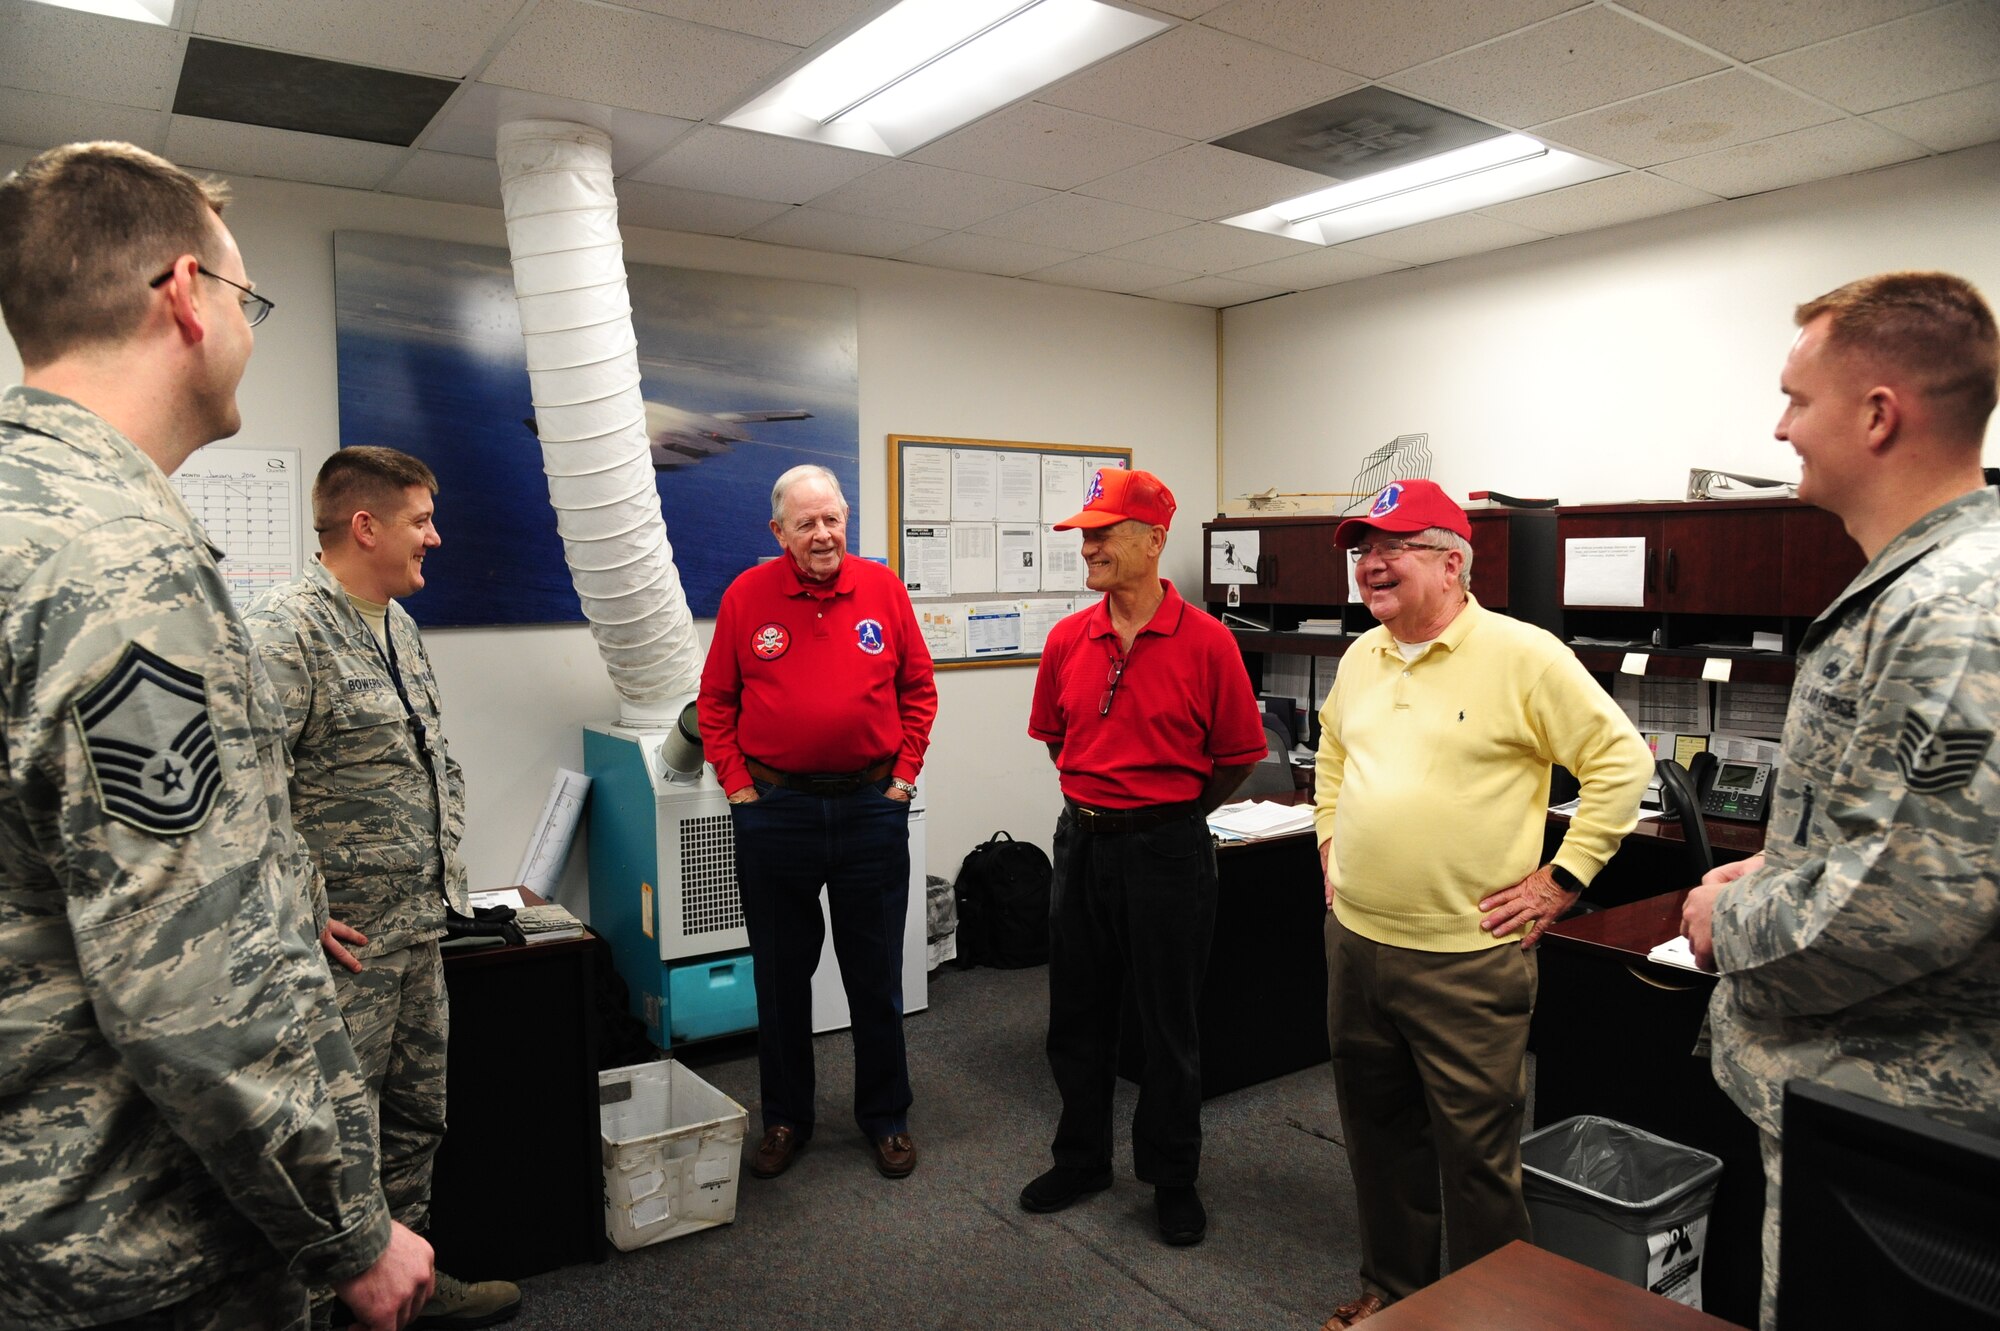 Charlie Brown, the 13th Bomb Squadron Association (BS) president, center left, Charlie Breitzke, a 13th BS Association volunteer, center, and Bob Parks, the 13th Bomb Squadron Association vice president, center right, share a laugh with Airmen from the 13th Aircraft Maintenance Unit at Whiteman Air Force Base, Mo., Dec. 17, 2015. During their visit, they spoke with different Airmen among various units, discussing the current 13th BS’s mission as well as their personal stories, tying the past and present to the same legacy. (U.S. Air Force photo by Senior Airman Keenan Berry) 